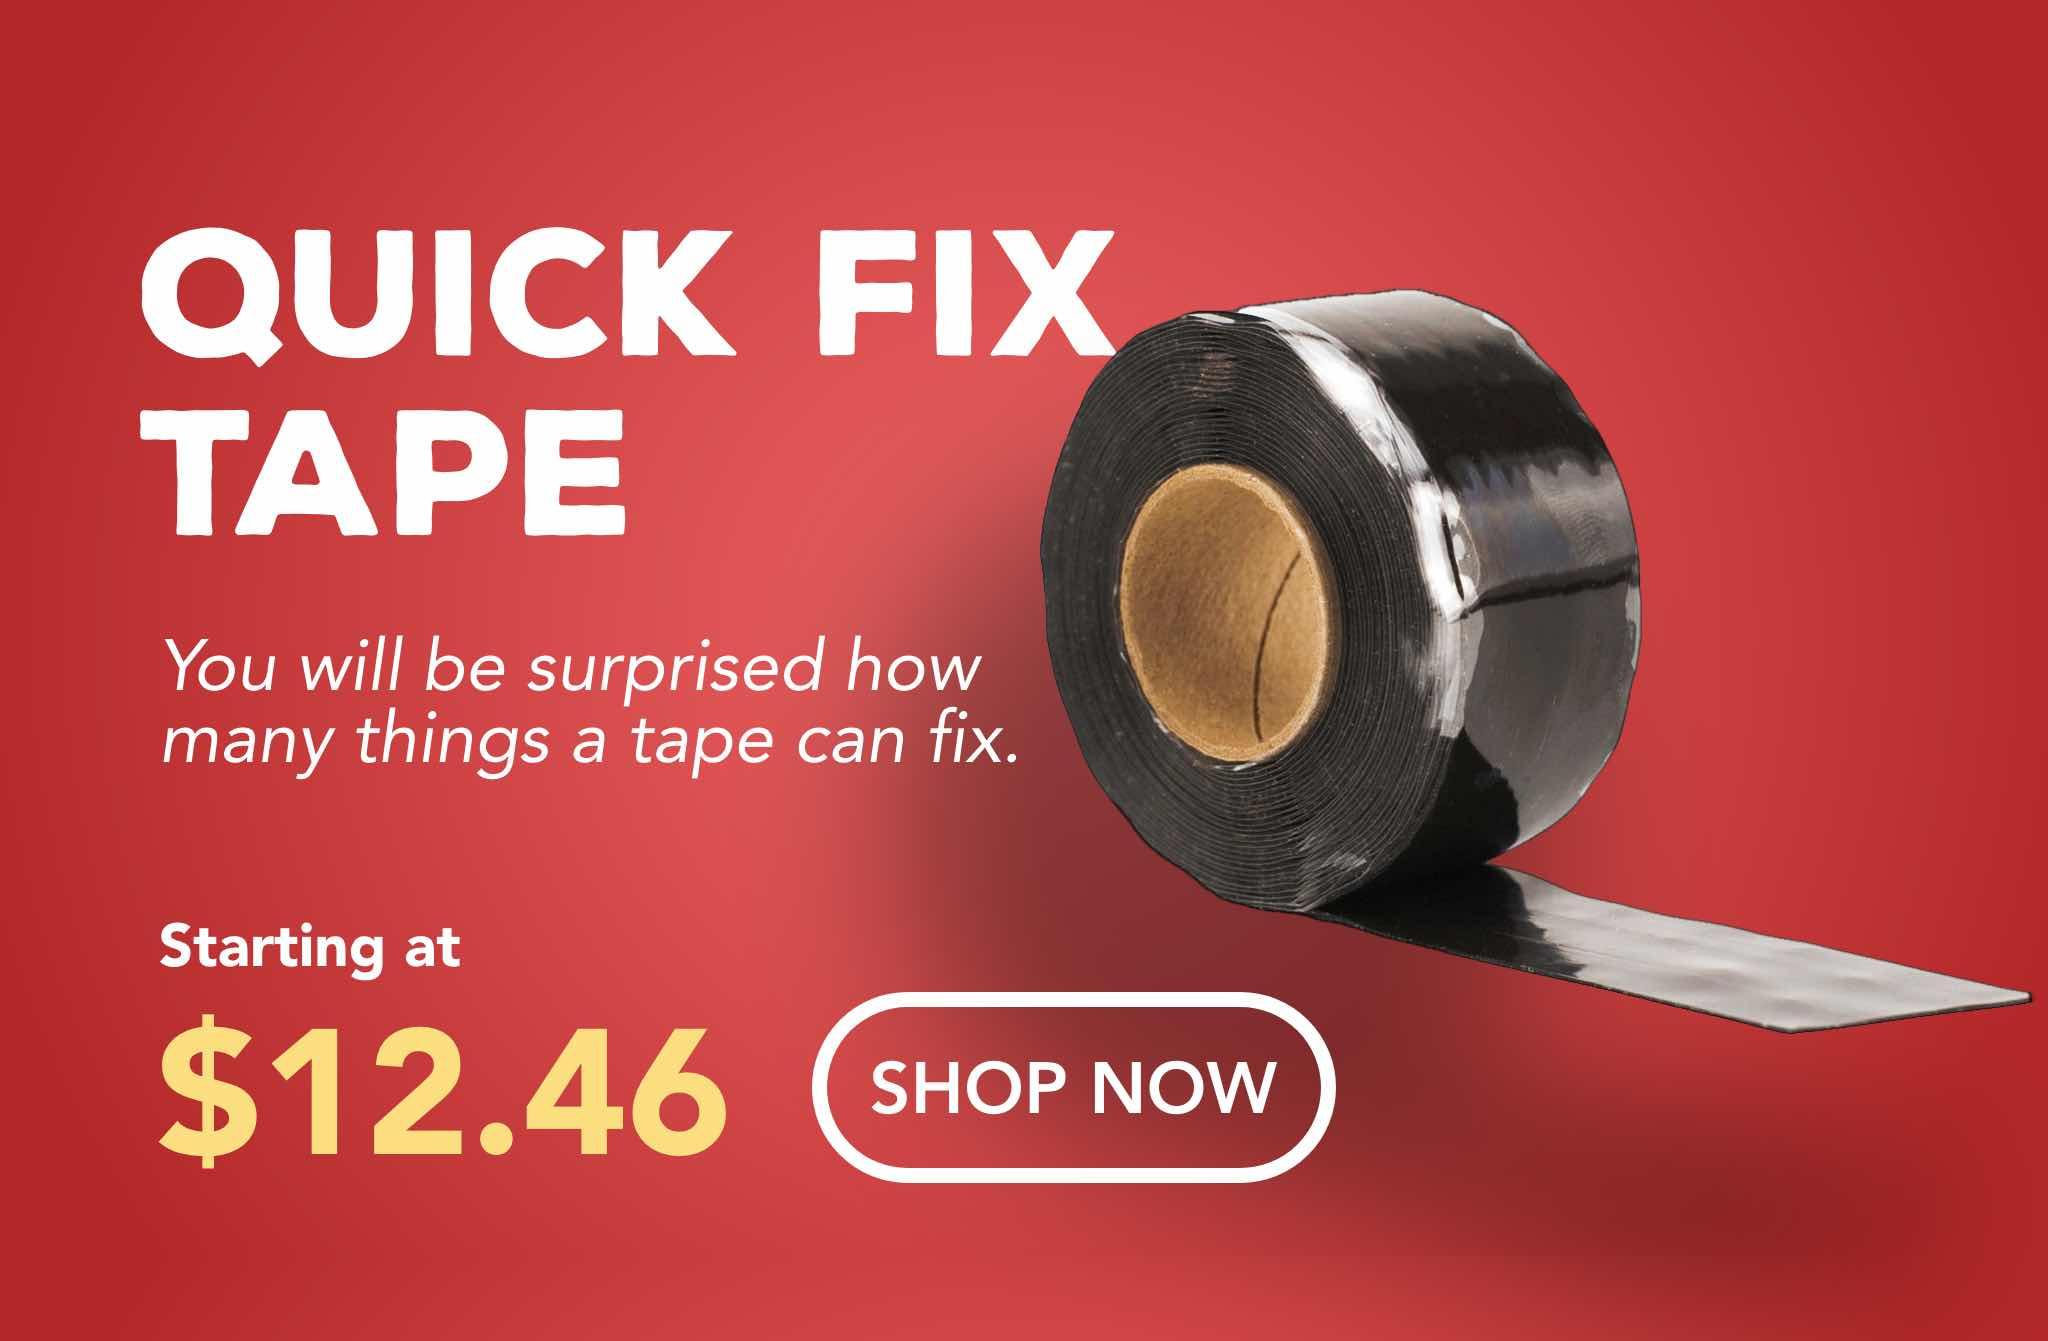 You will be surprised how many things a tape can fix.